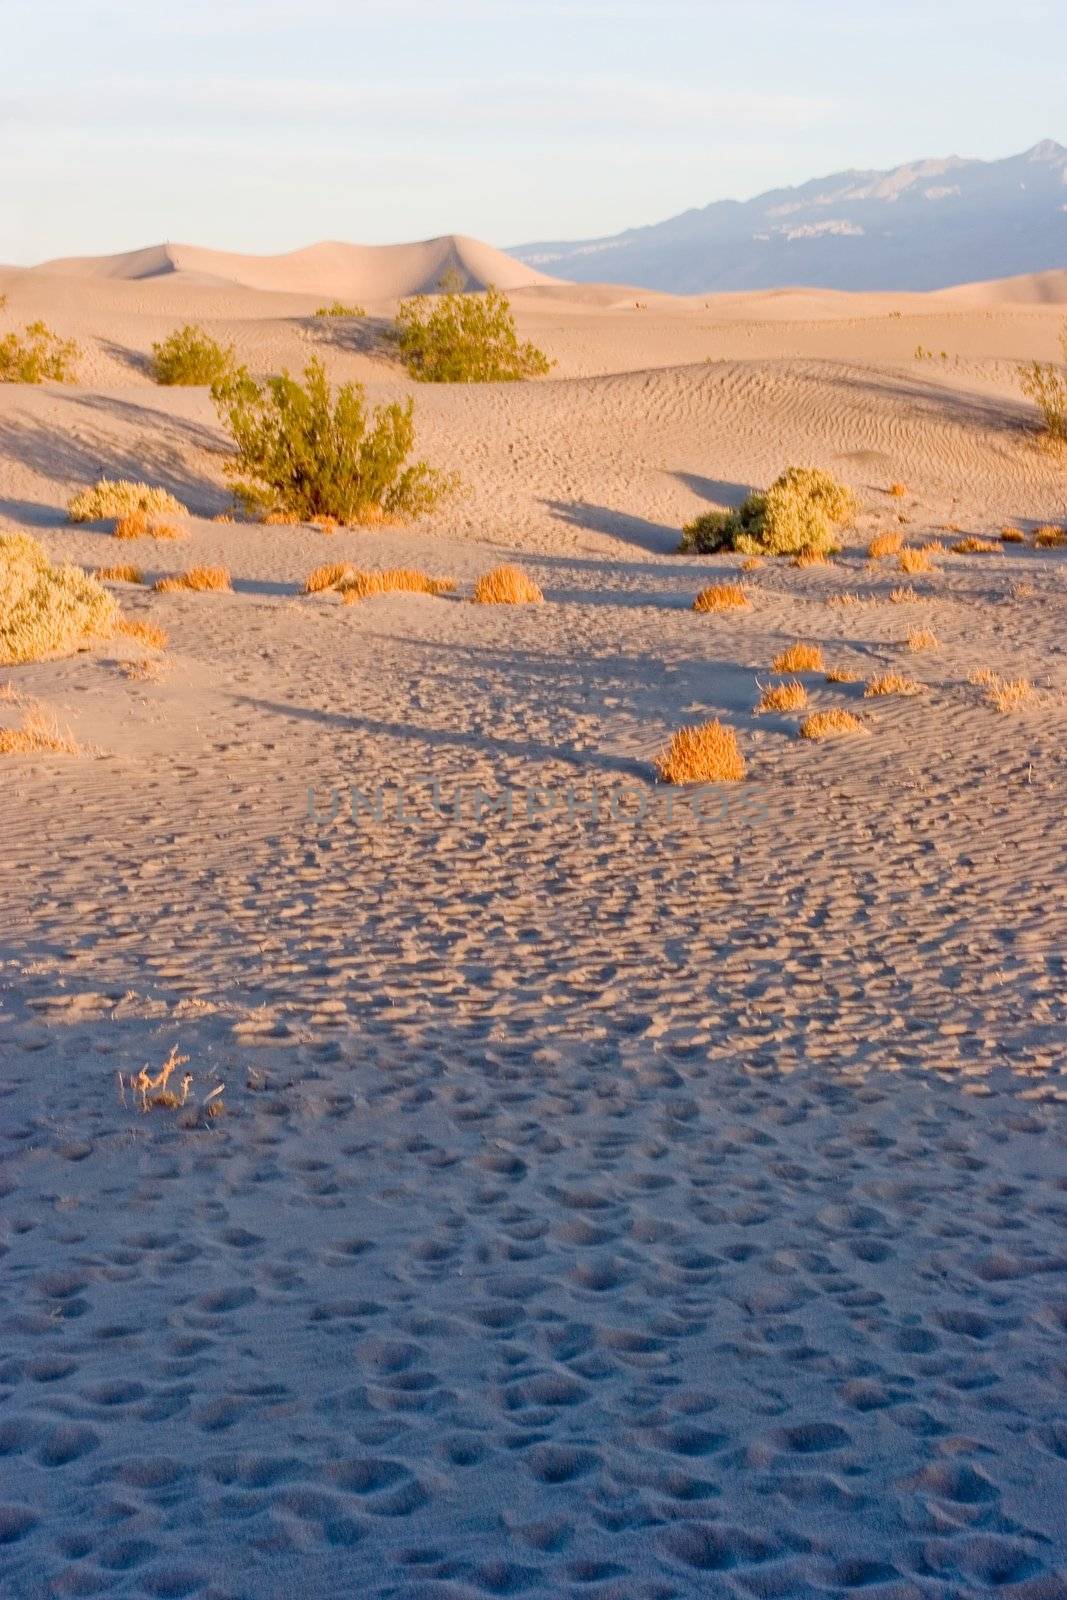 Sand dunes in Death Valley National Park near Stovepipe Wells.